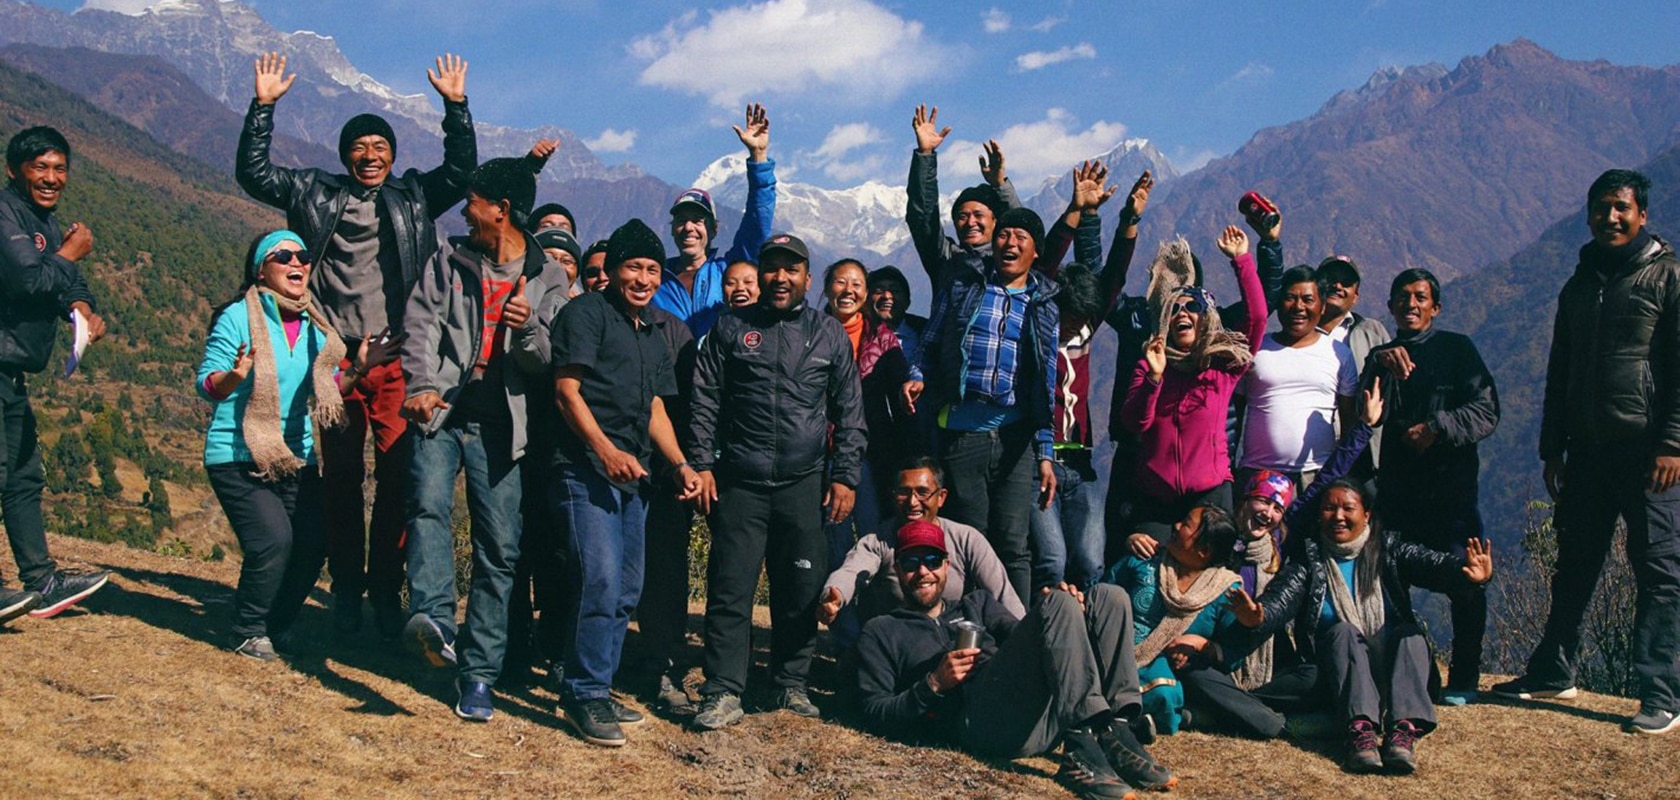 group of people smiling and cheering on a mountain path